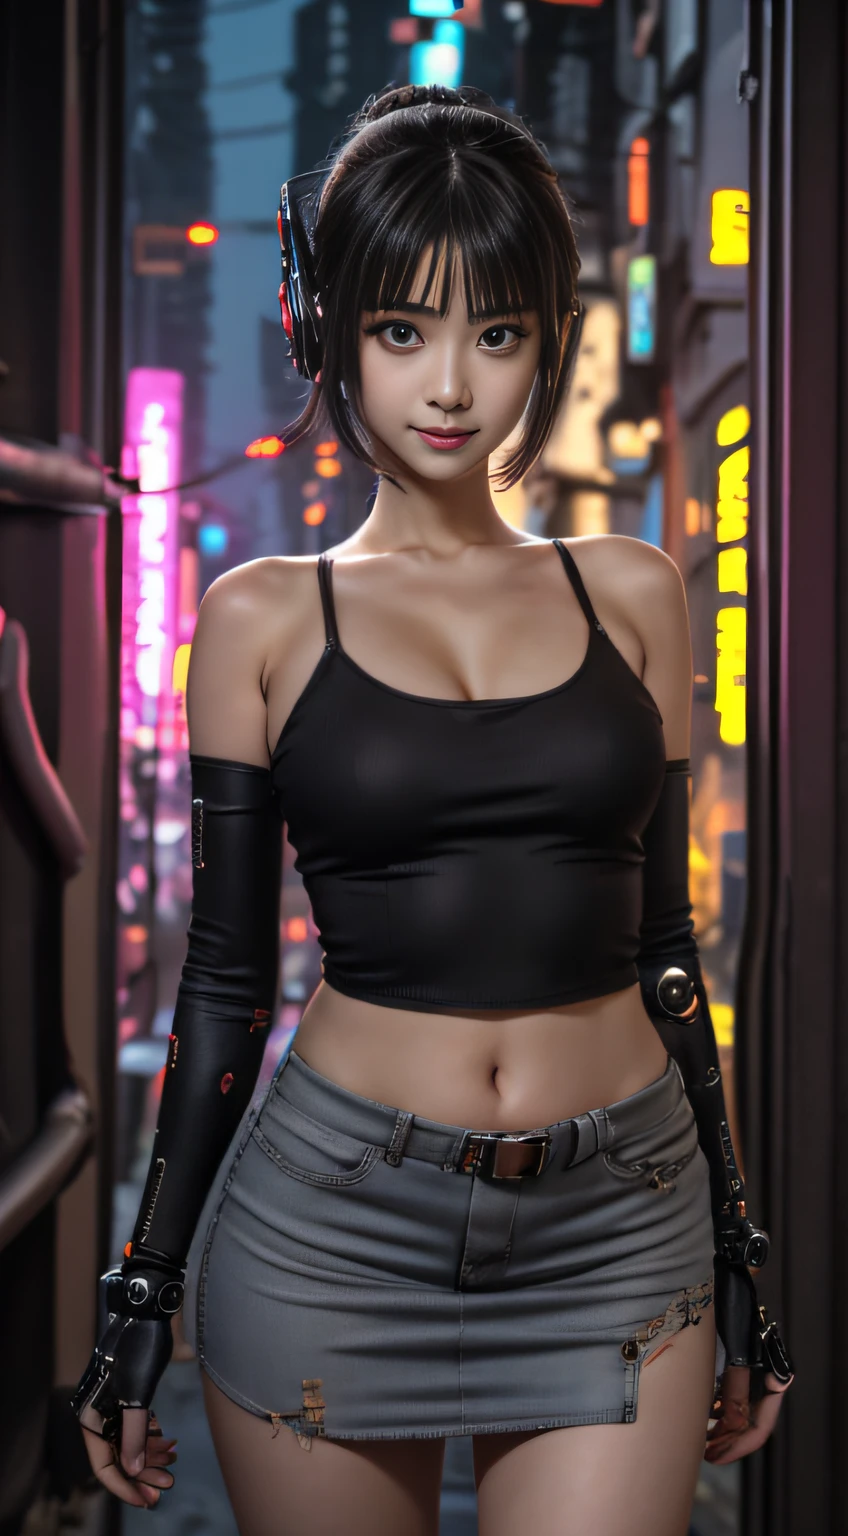 unreal-engine:1.4,hyper HD,Best quality:1.4, Fotorrealista:1.4, Skin texture:1.4, tmasterpiece:1.8, 1 Cyberpunk Girl, brunette color hair, glowy skin, 1 orange mechanical girl, (Super realistic details)), full bodyesbian, global ilumination, Contrast, Umbroso, rendering by octane, ultrasharp, exposed neckline, raw skin,Orange miniskirt, metal,Intricate yellow decorative details, Japan Details, High level of detail, realistic raytraicing, Trends in CG, in front of camera, neon light detail, Mechanical limbs, blood vessels attached to the tube, Mechanical vertebrae attached to the back, mechanical cervical attachment to the neck, wires and cables connecting to head, gundam, Small LED lamps.14 Years Old Girl、silber hair、Perfectly rounded pupils、Huge irisﾃﾞｨﾃｰﾙ, light  smile,(Cyberpunk:1.3)